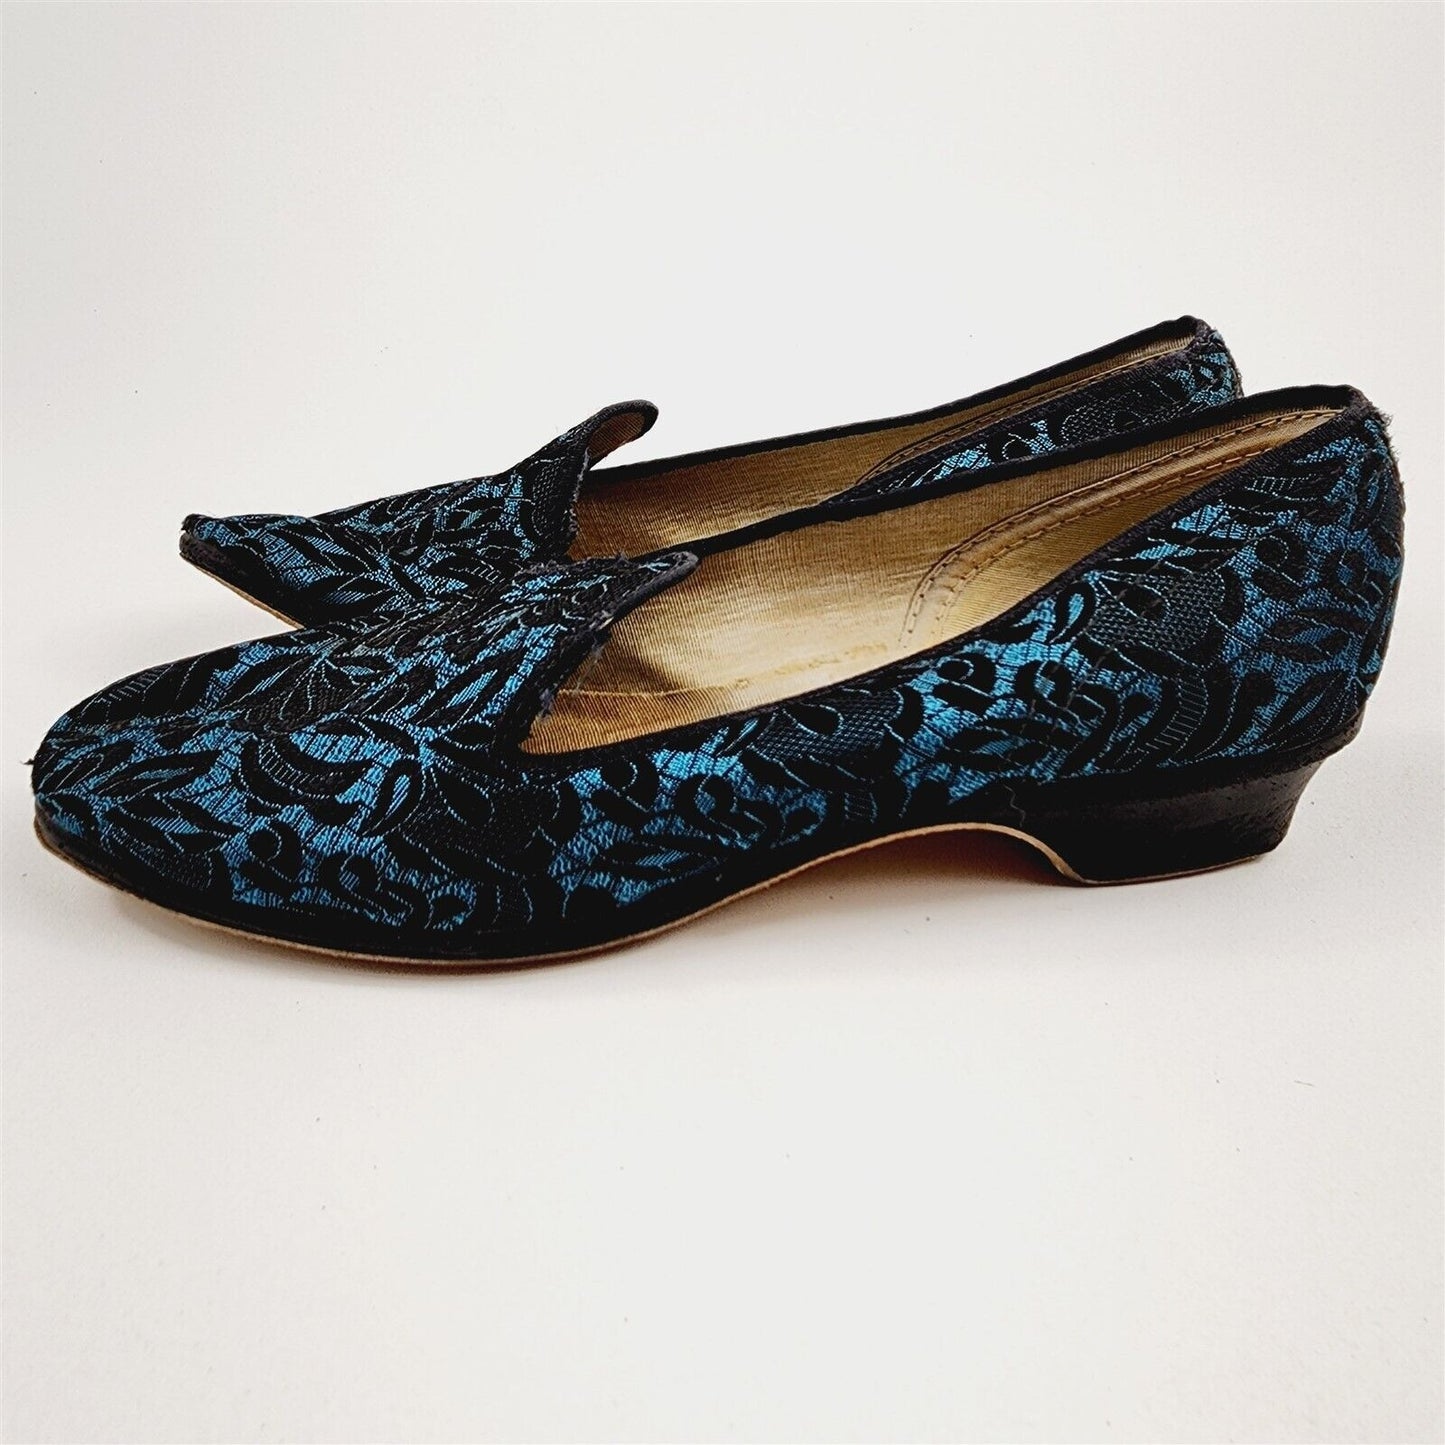 Vintage Black & Blue Wellco Brocade Embroidered Shoes Slippers Size 6